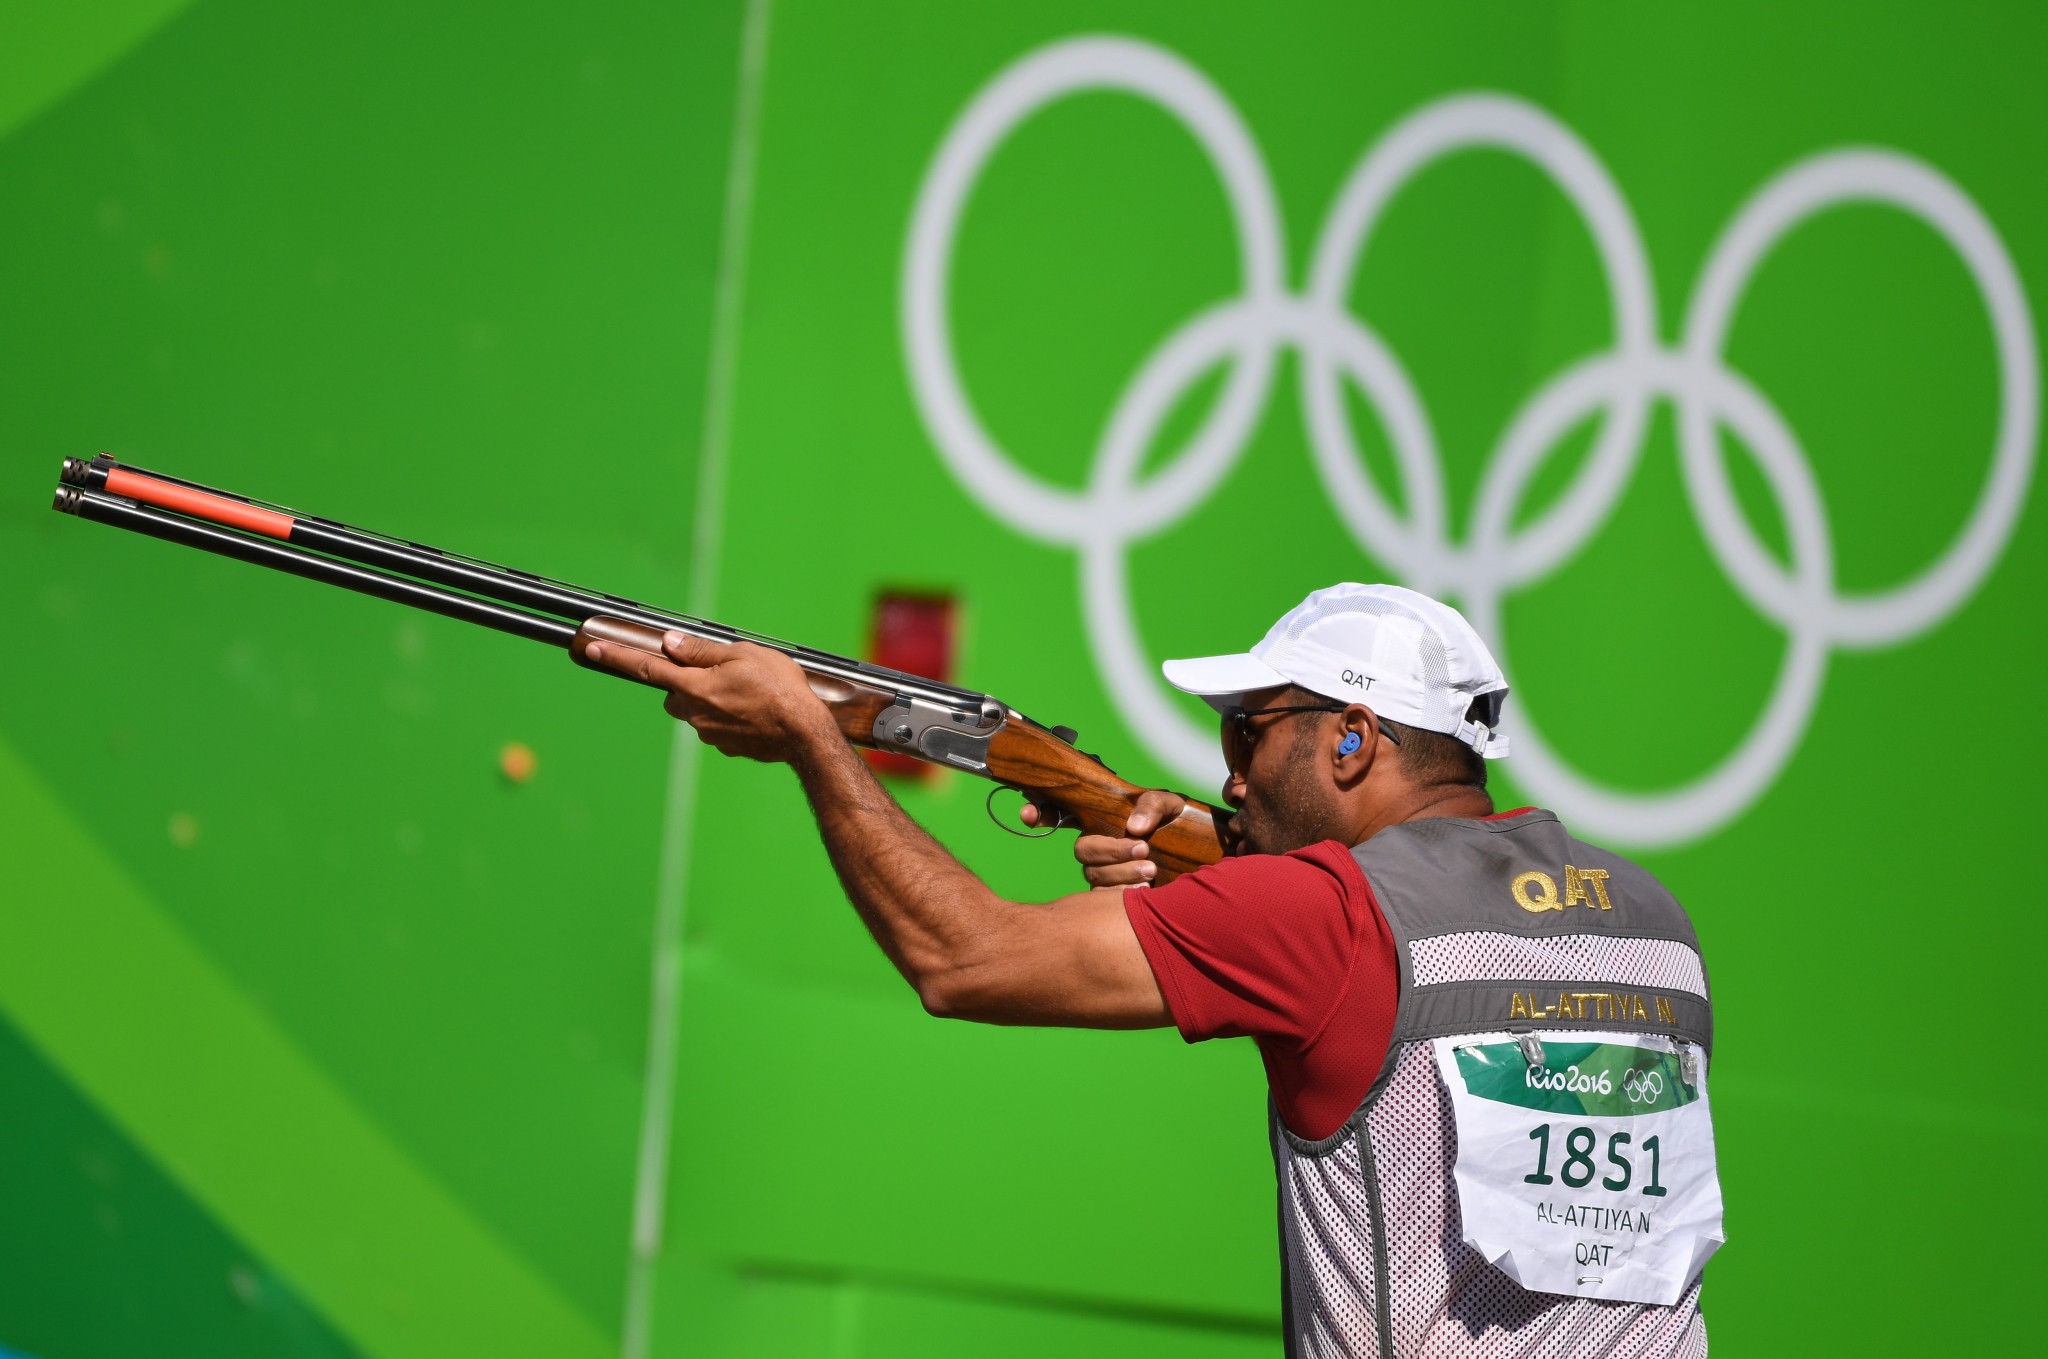 Olympic shooter Nasser Al-Attiyah is another Qatari athlete to back Doha 2030 ©Getty Images